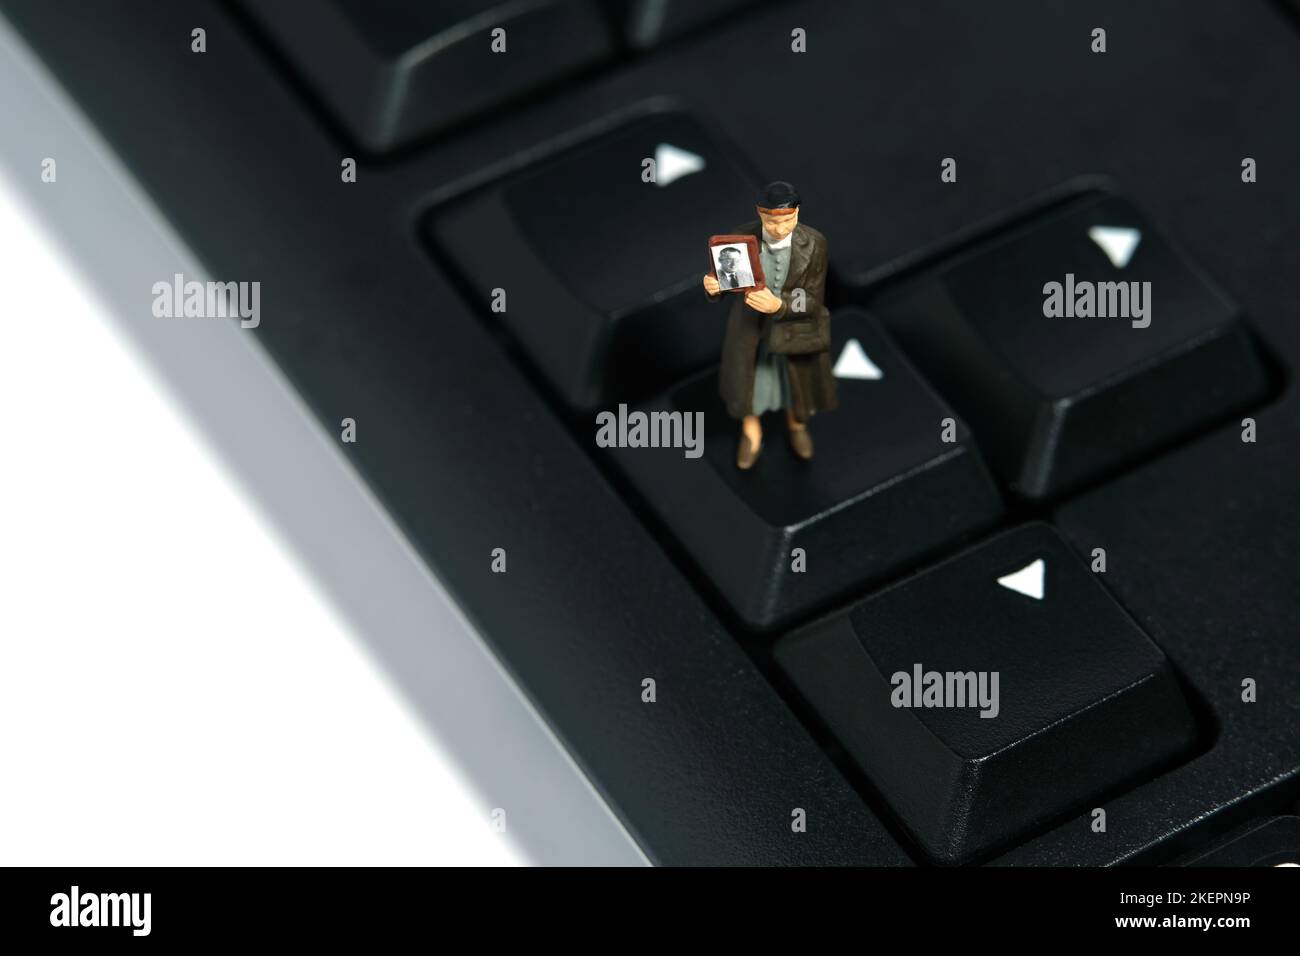 Miniature people toy figure photography. A woman holding photo frame standing above keyboard arrow, searching missing person because of war conflict. Stock Photo